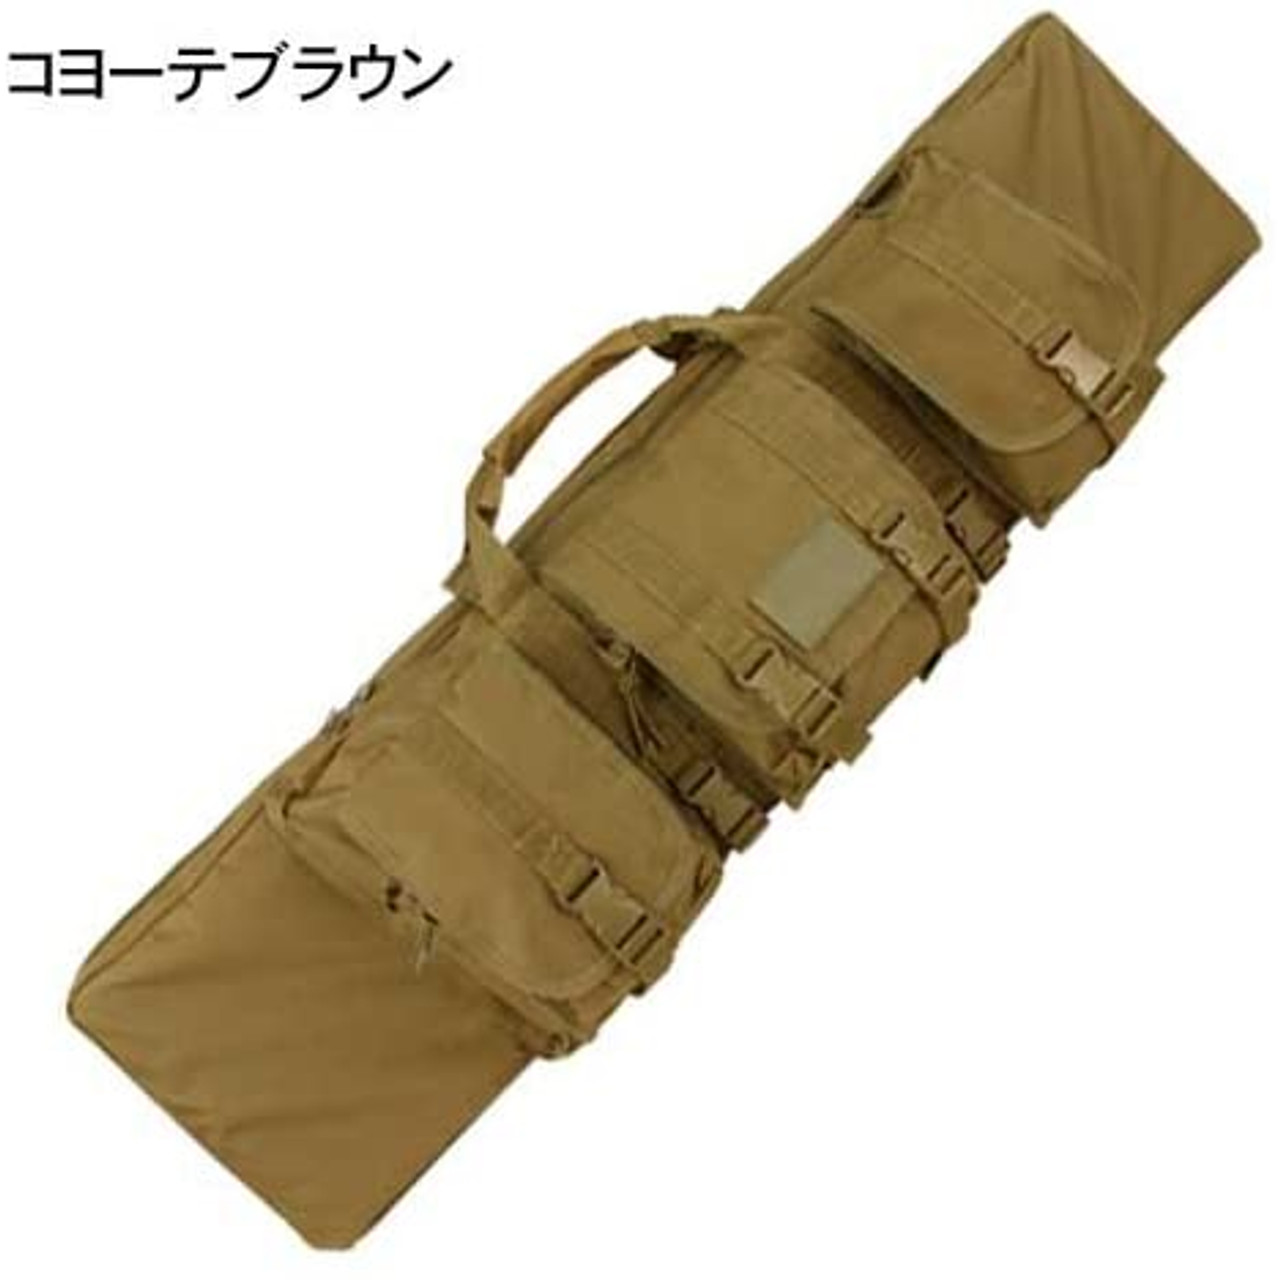 CONDOR Tactical Gear with 3 pouches (removable) Rifle case Coyote Brown